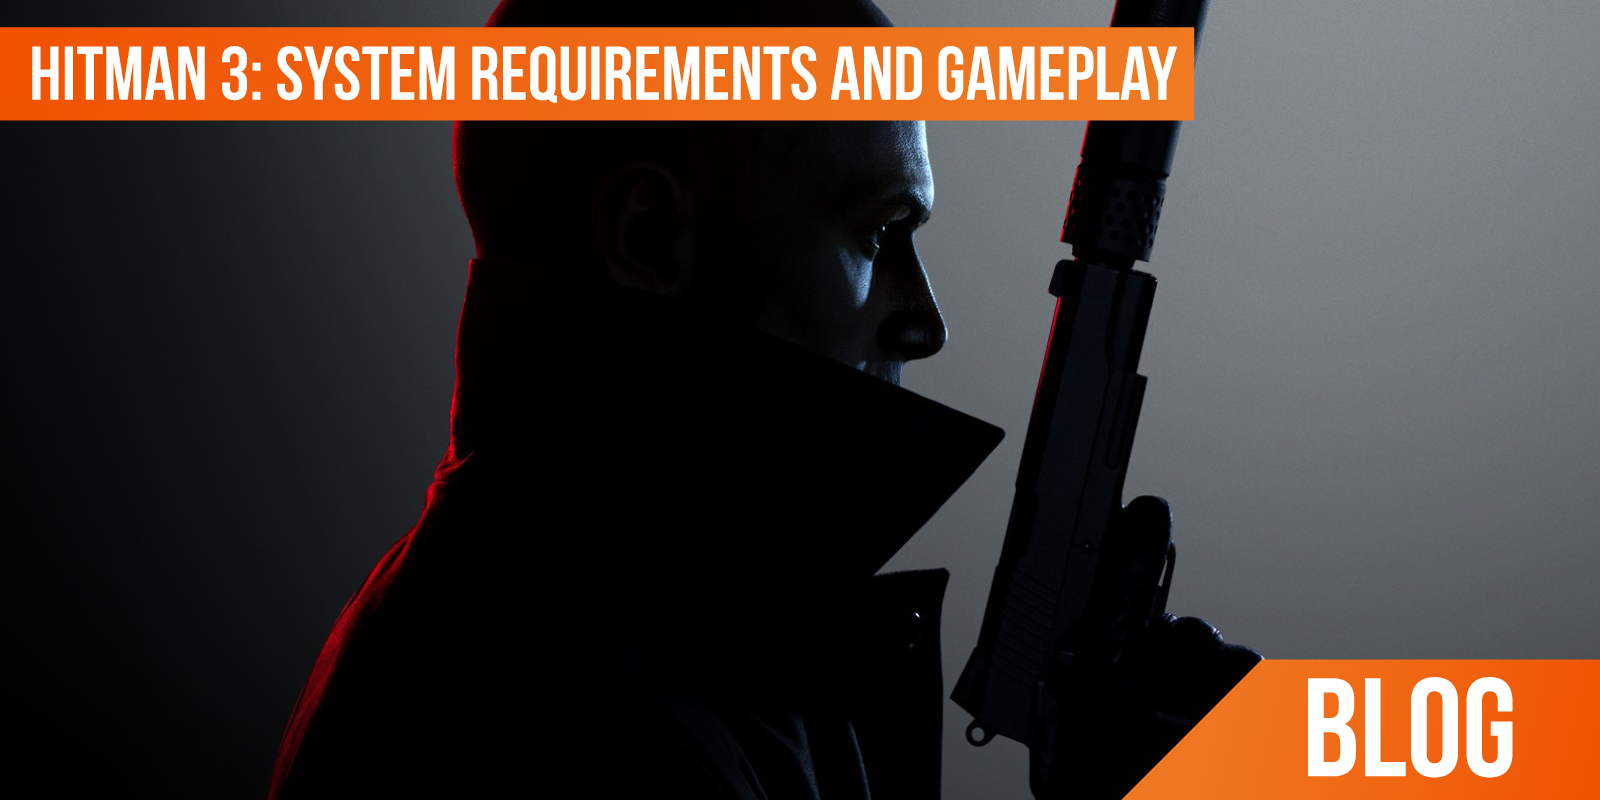 What is the recommended system for Hitman 3?